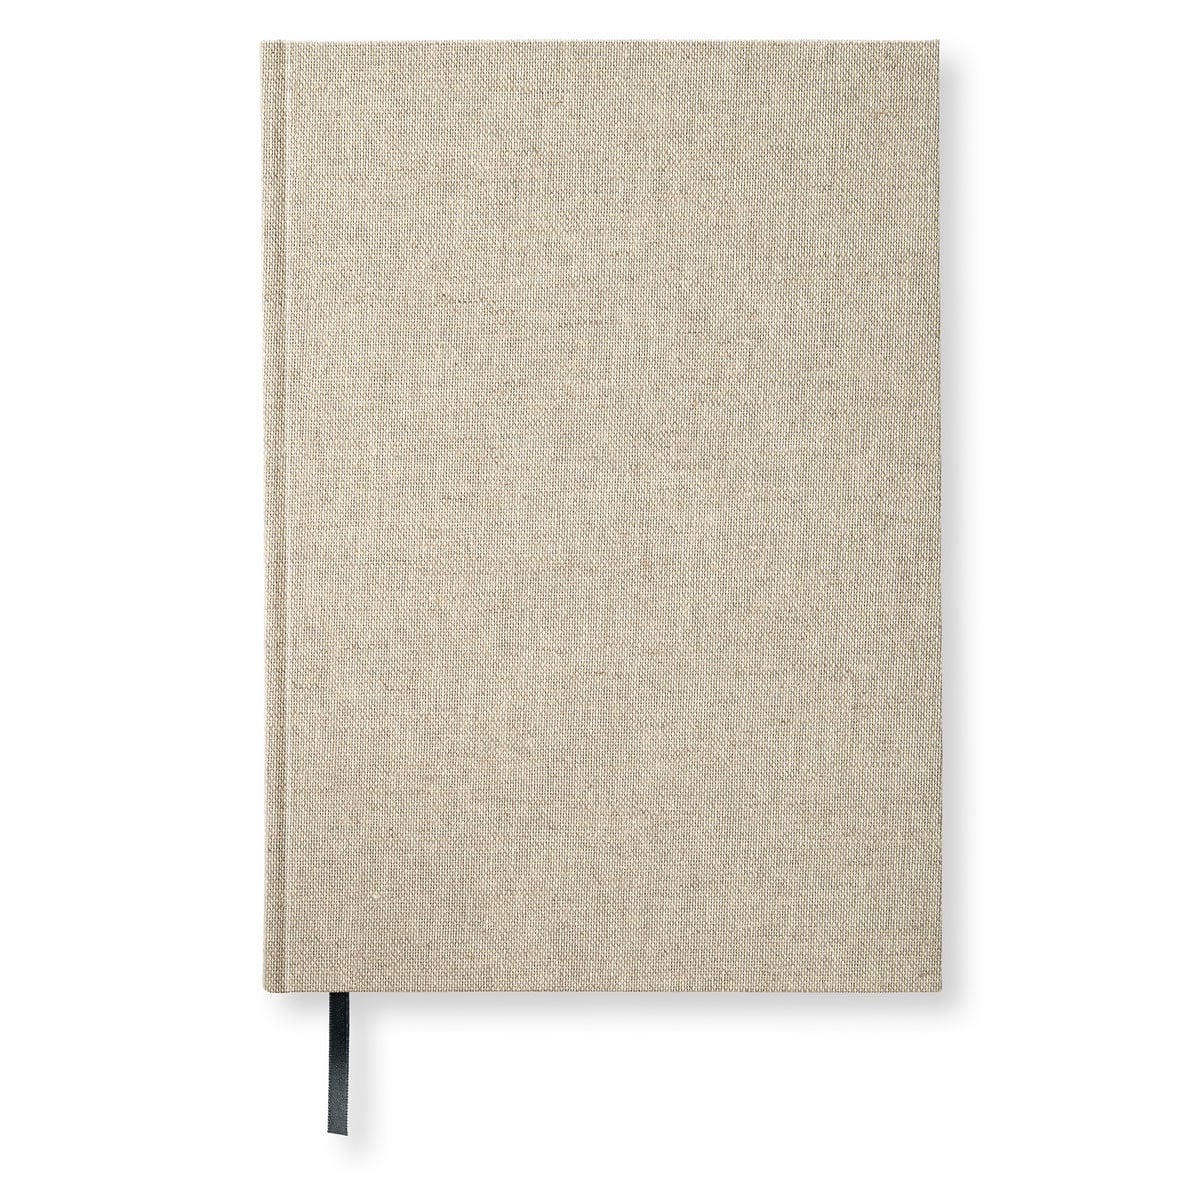 PaperStyle PS NOTEBOOK A4 Ruled Rough Linen